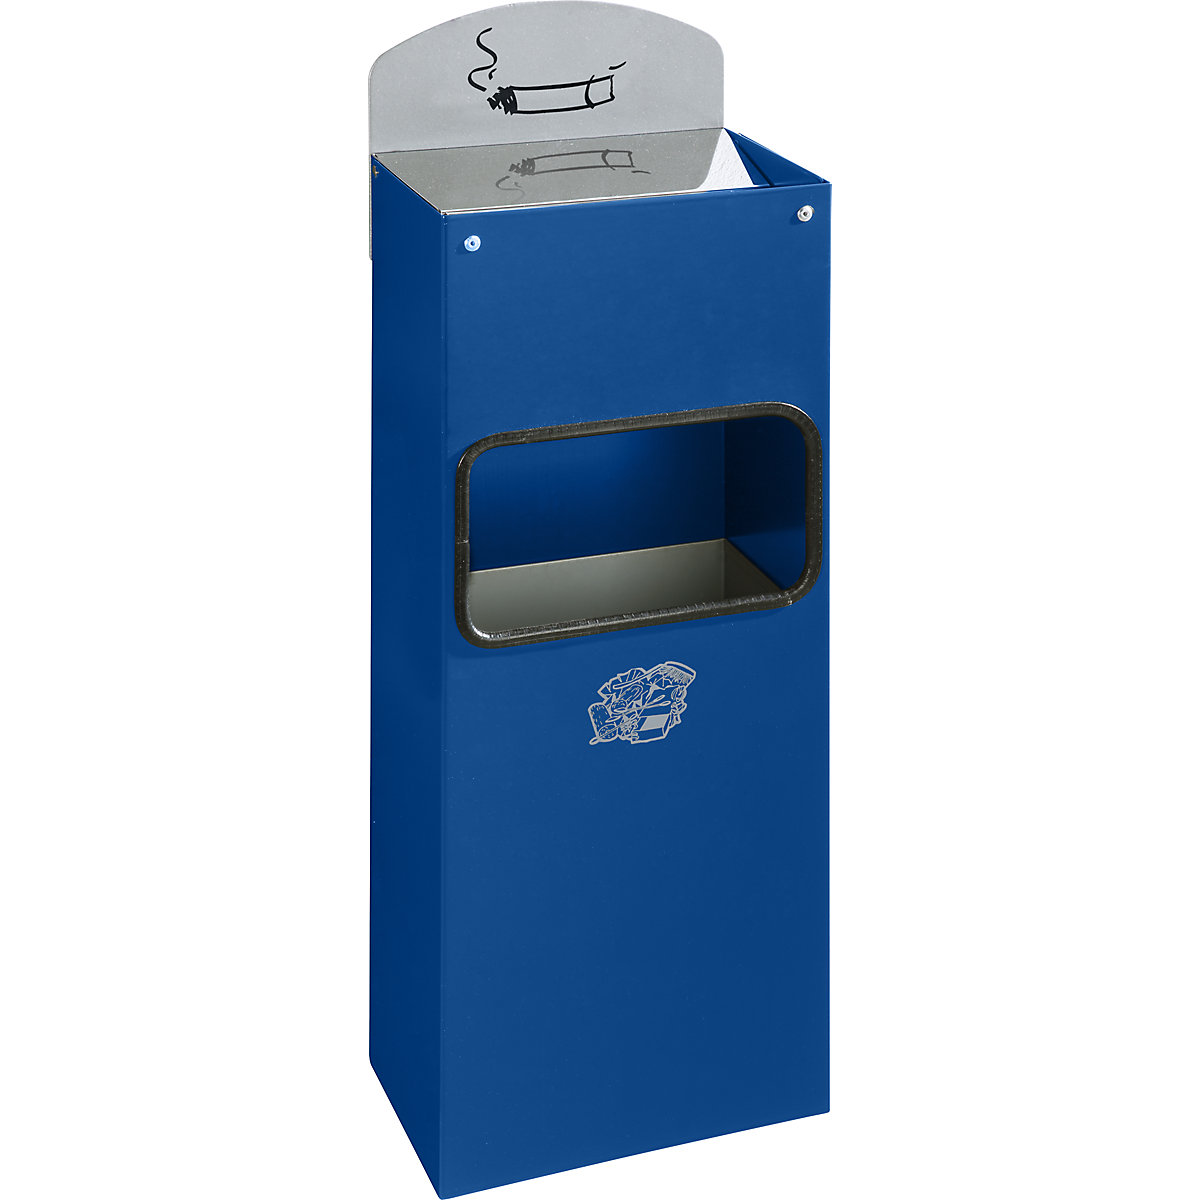 VAR – Combination wall ashtray with waste disposal, HxWxD 505 x 200 x 125 mm, sheet steel, gentian blue